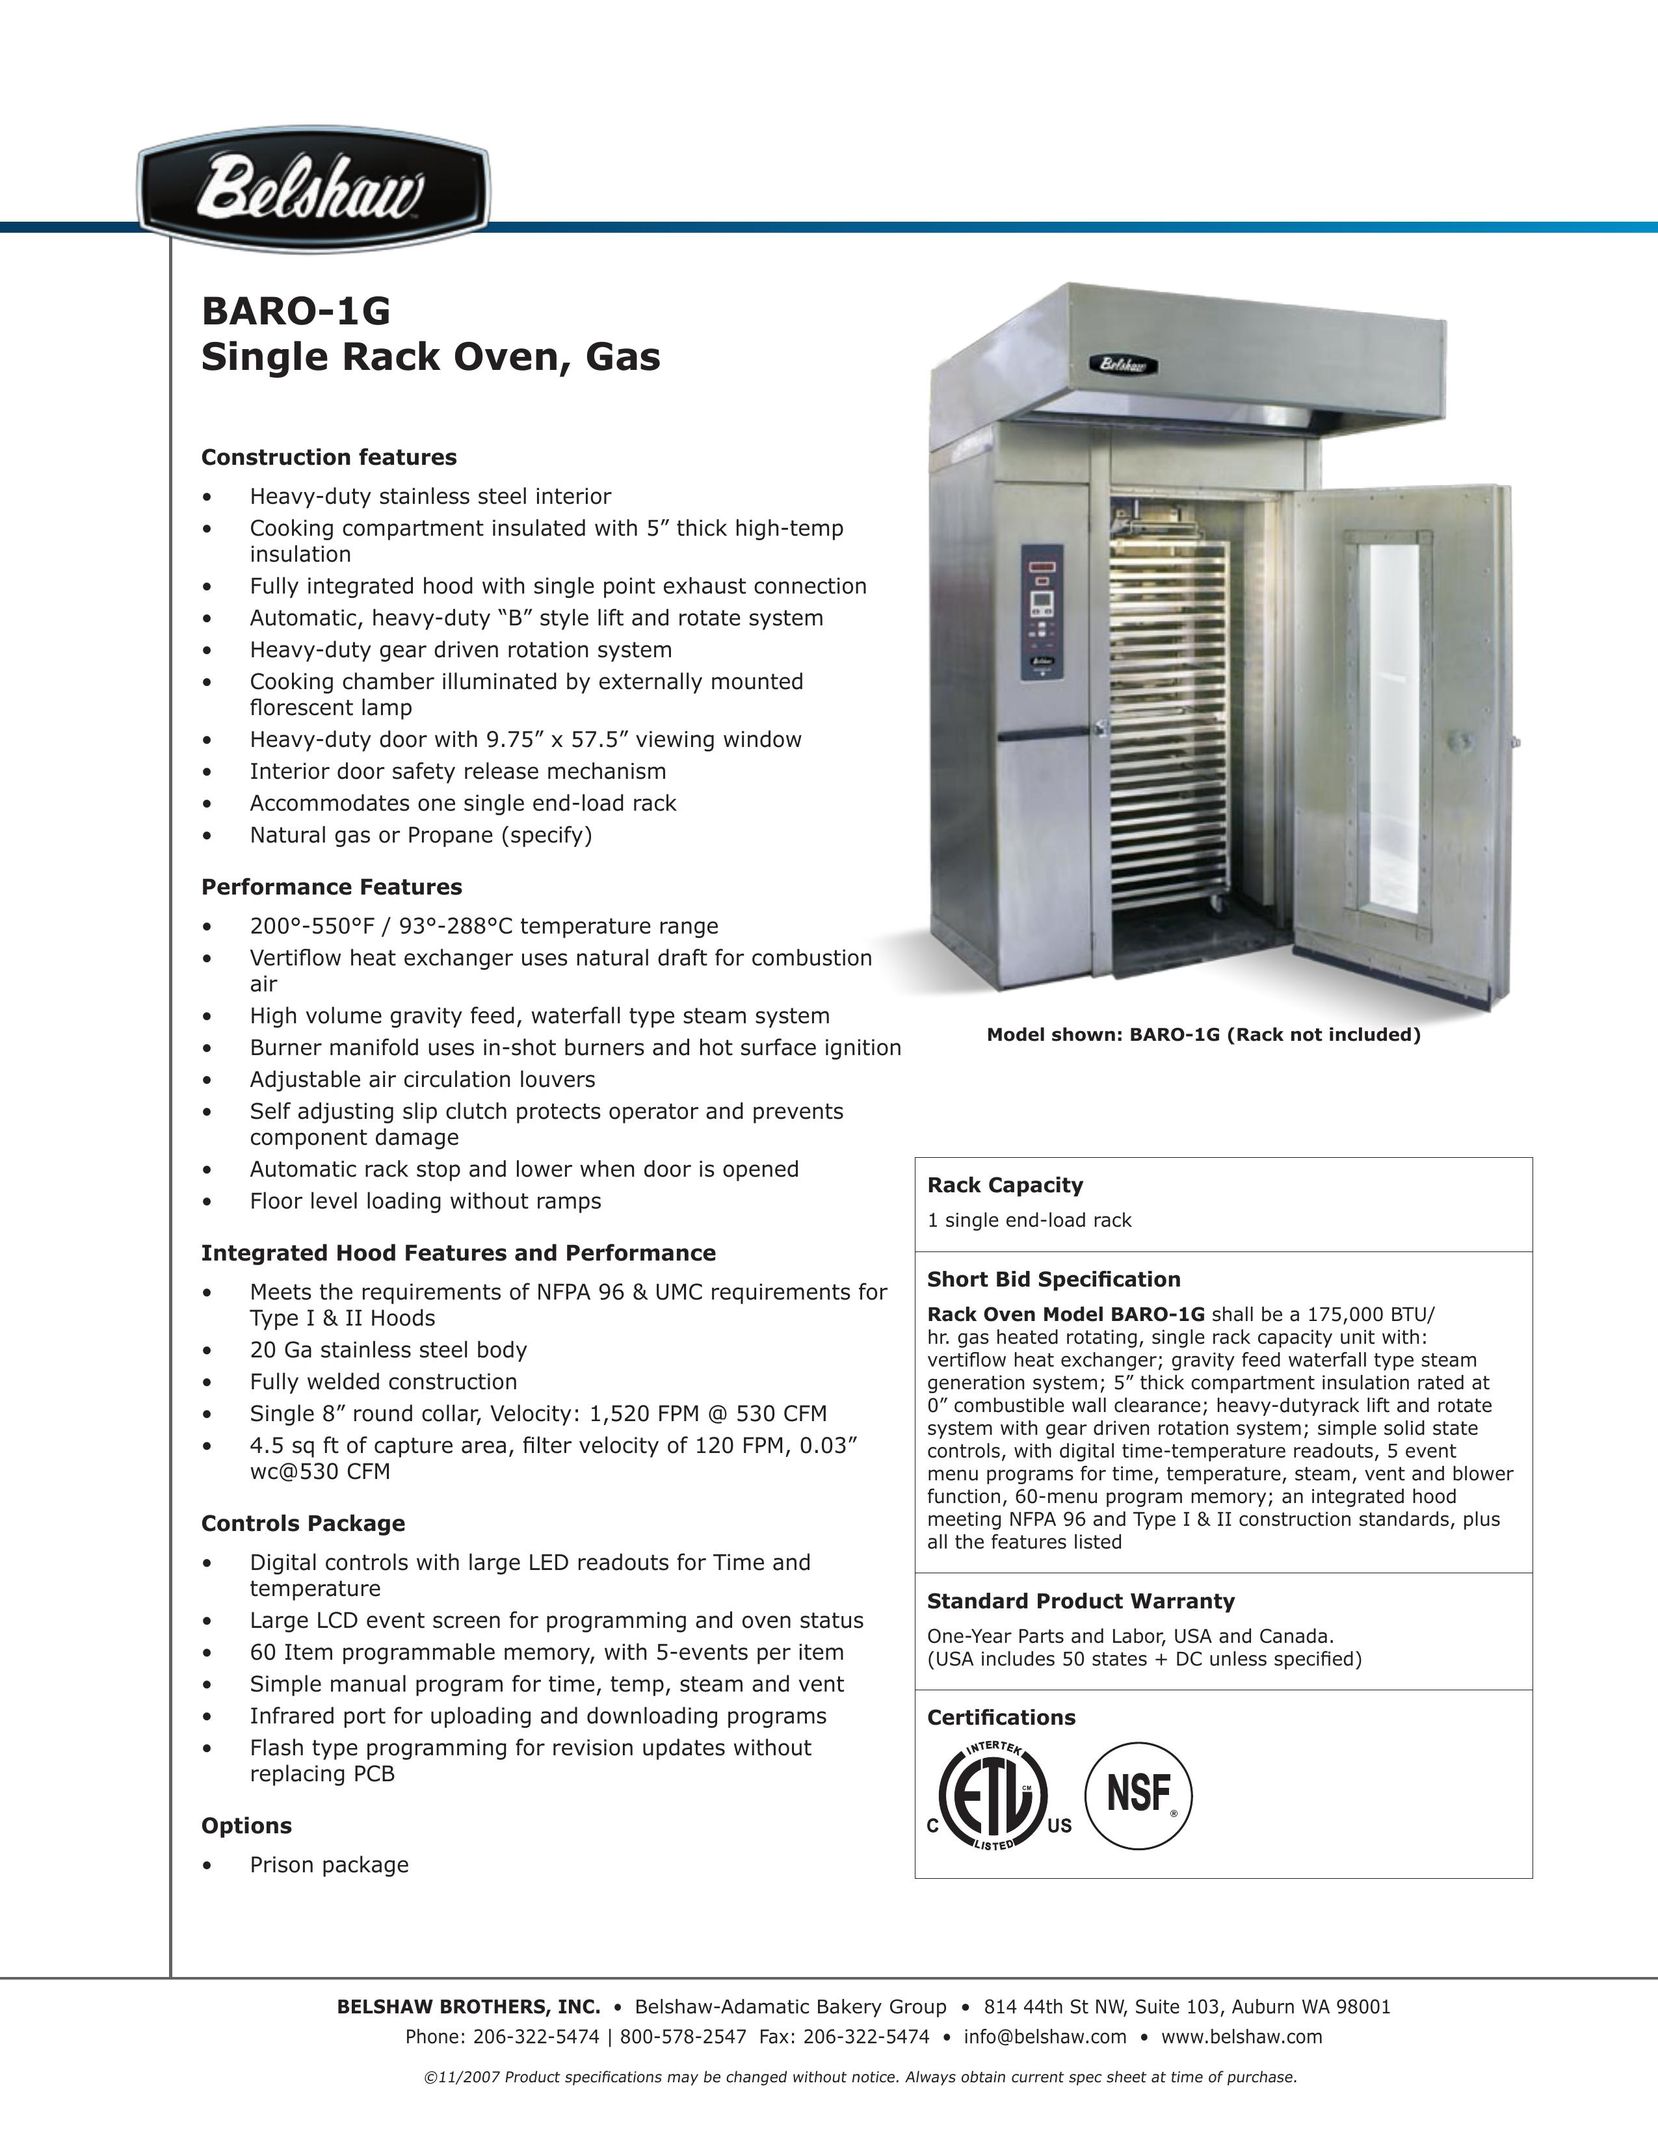 Belshaw Brothers BARO-1G Oven User Manual